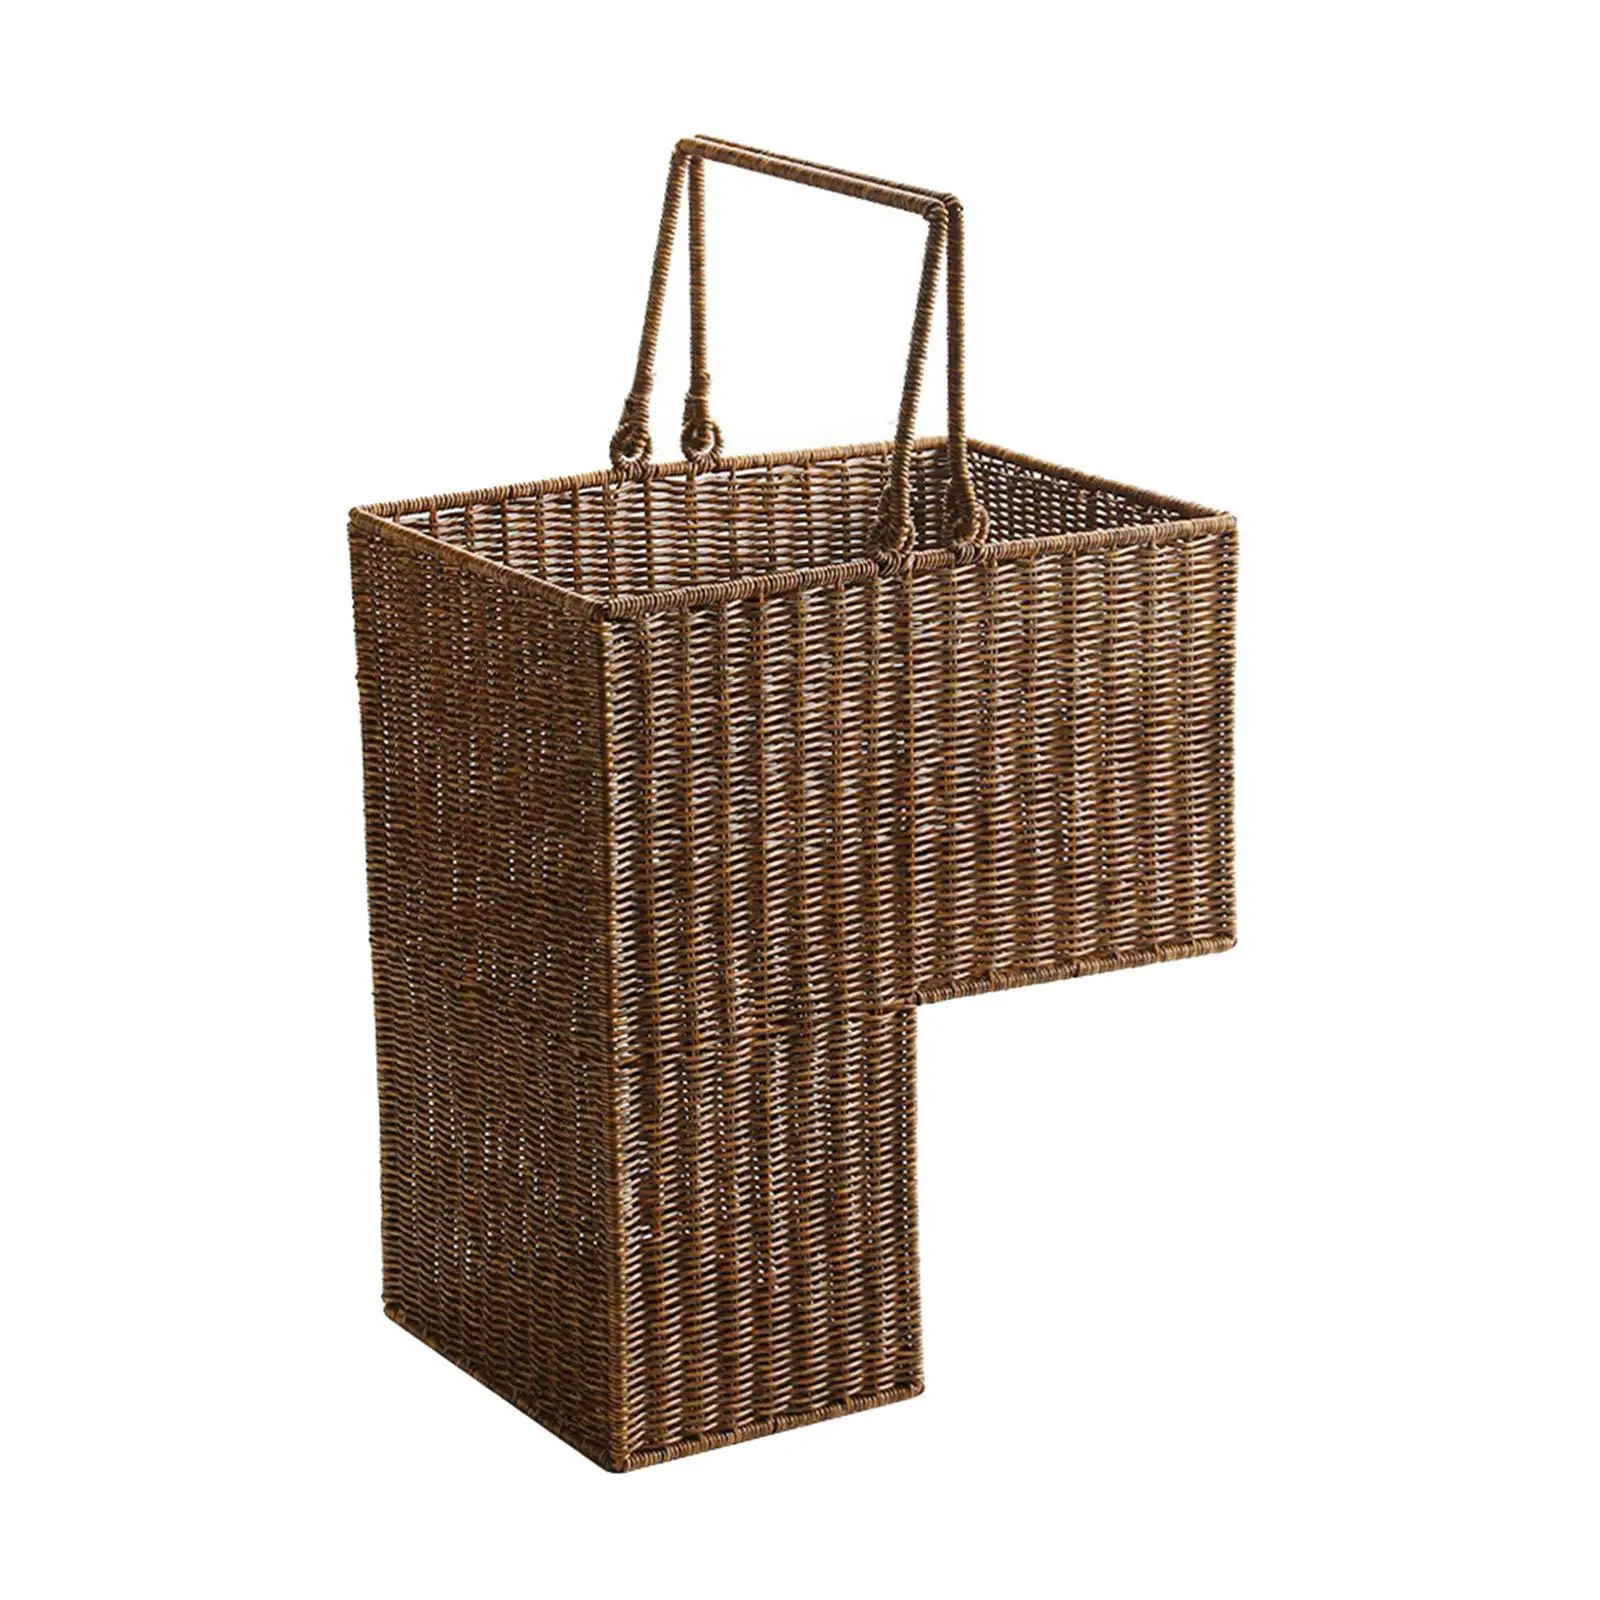 Stair Step Basket Handwoven Portable for Toiletries Sundries Magazines Home Decorative